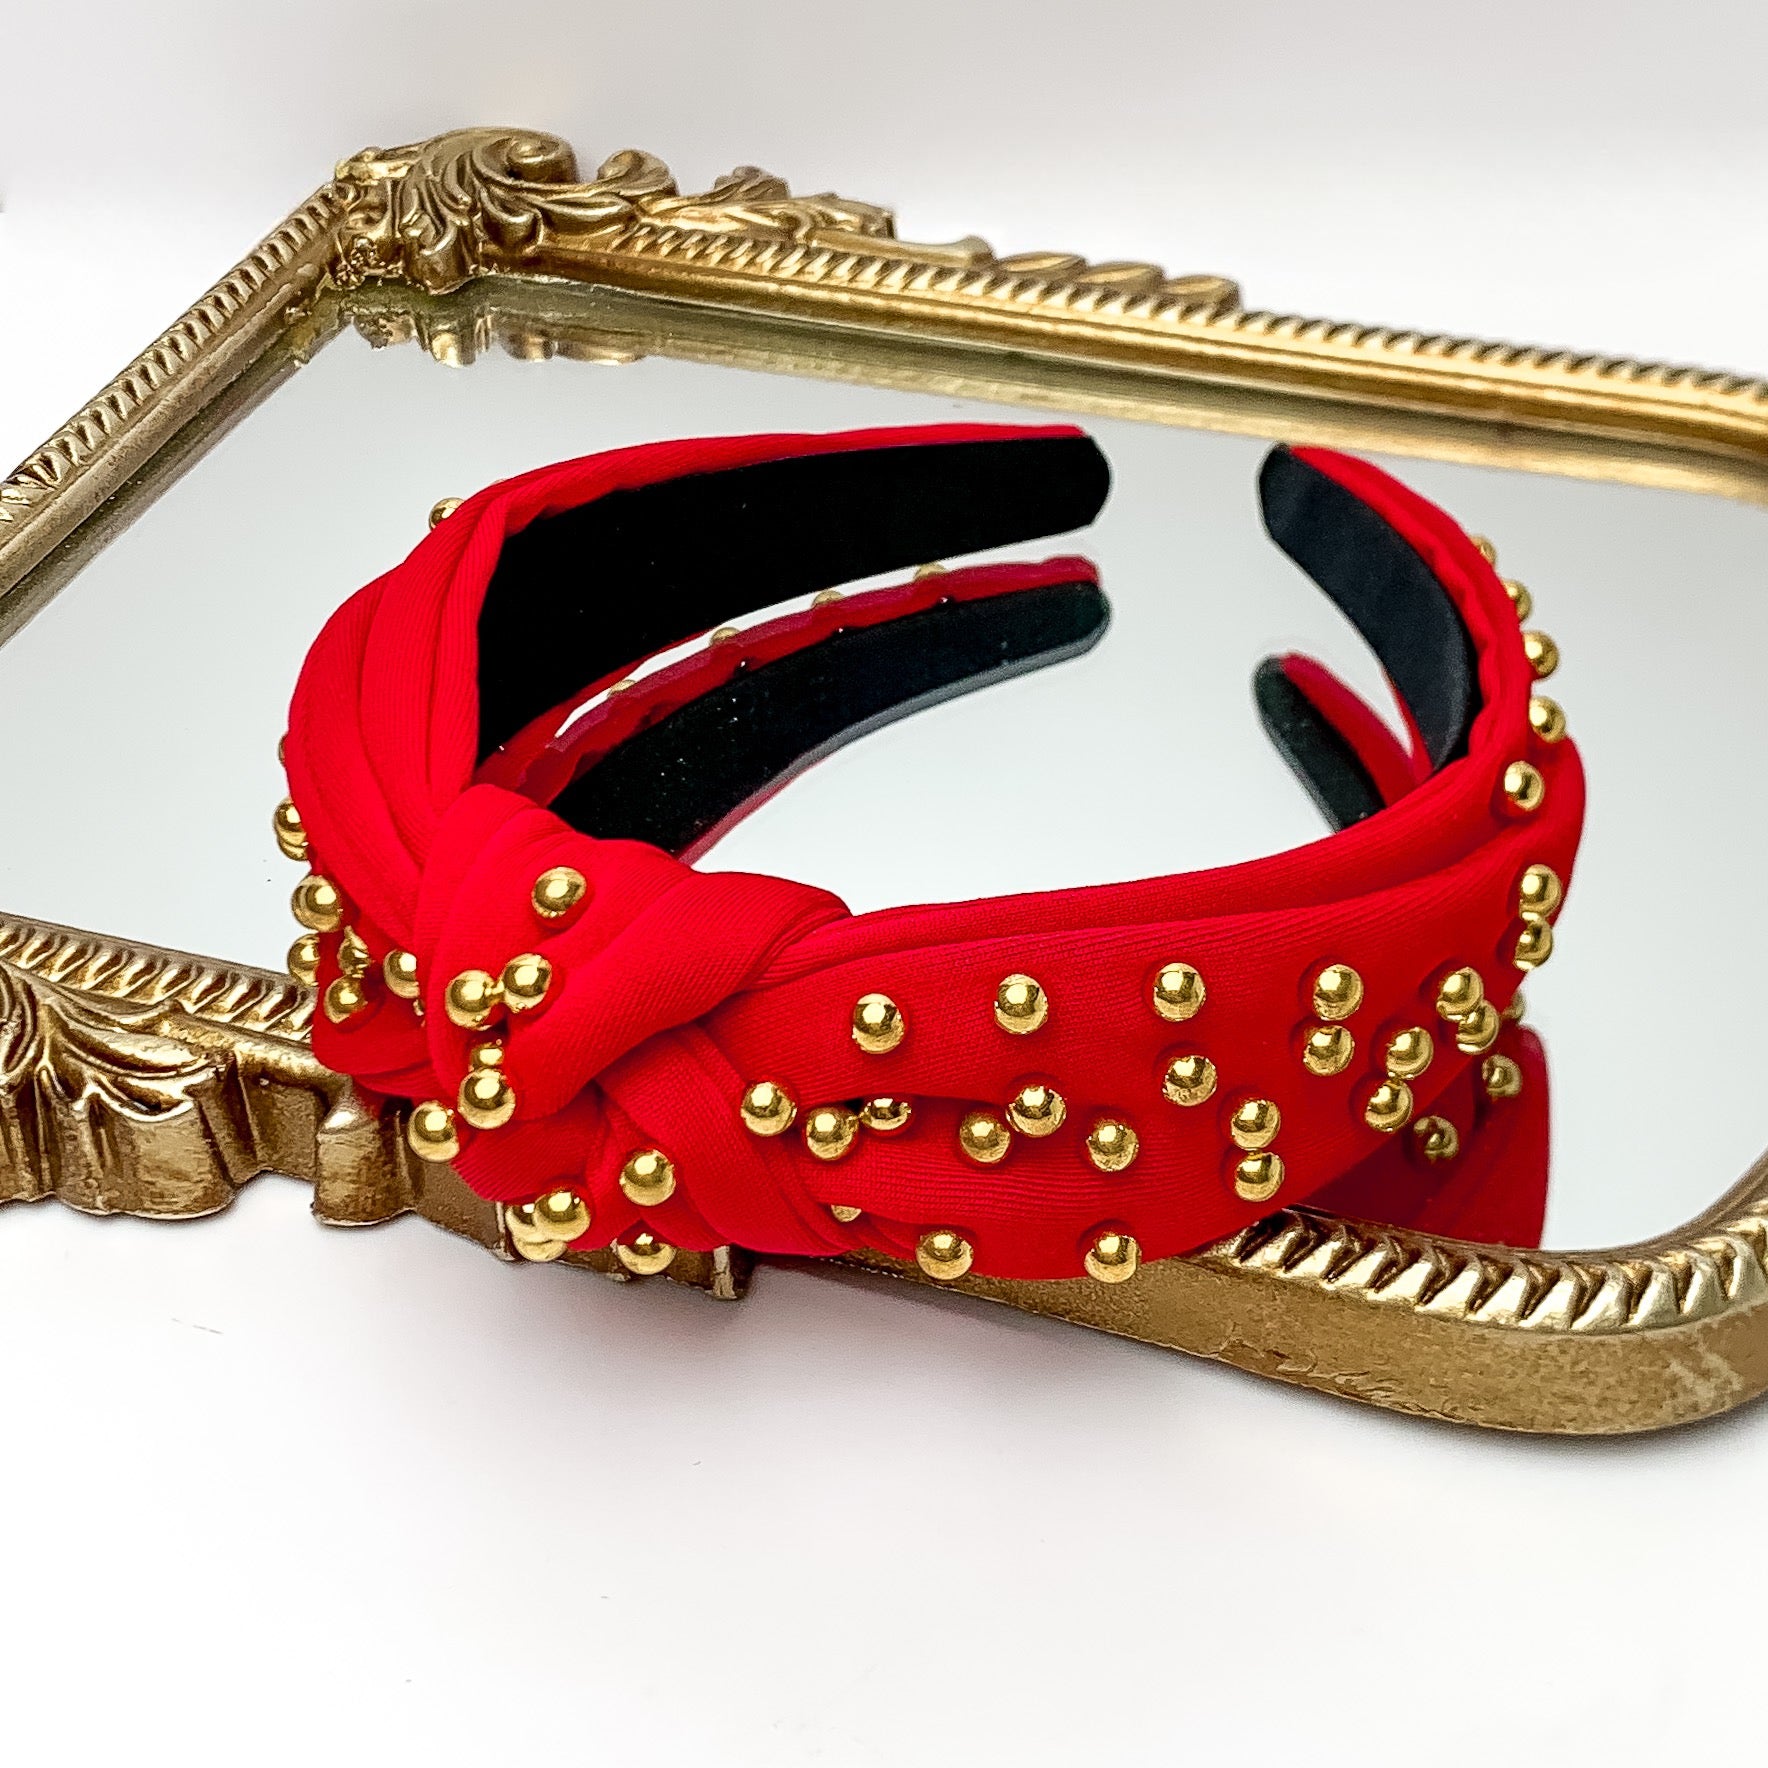 Gold Detailed Knot Headband in Red. Pictured on a white background with the headband on a gold trimmed mirror.